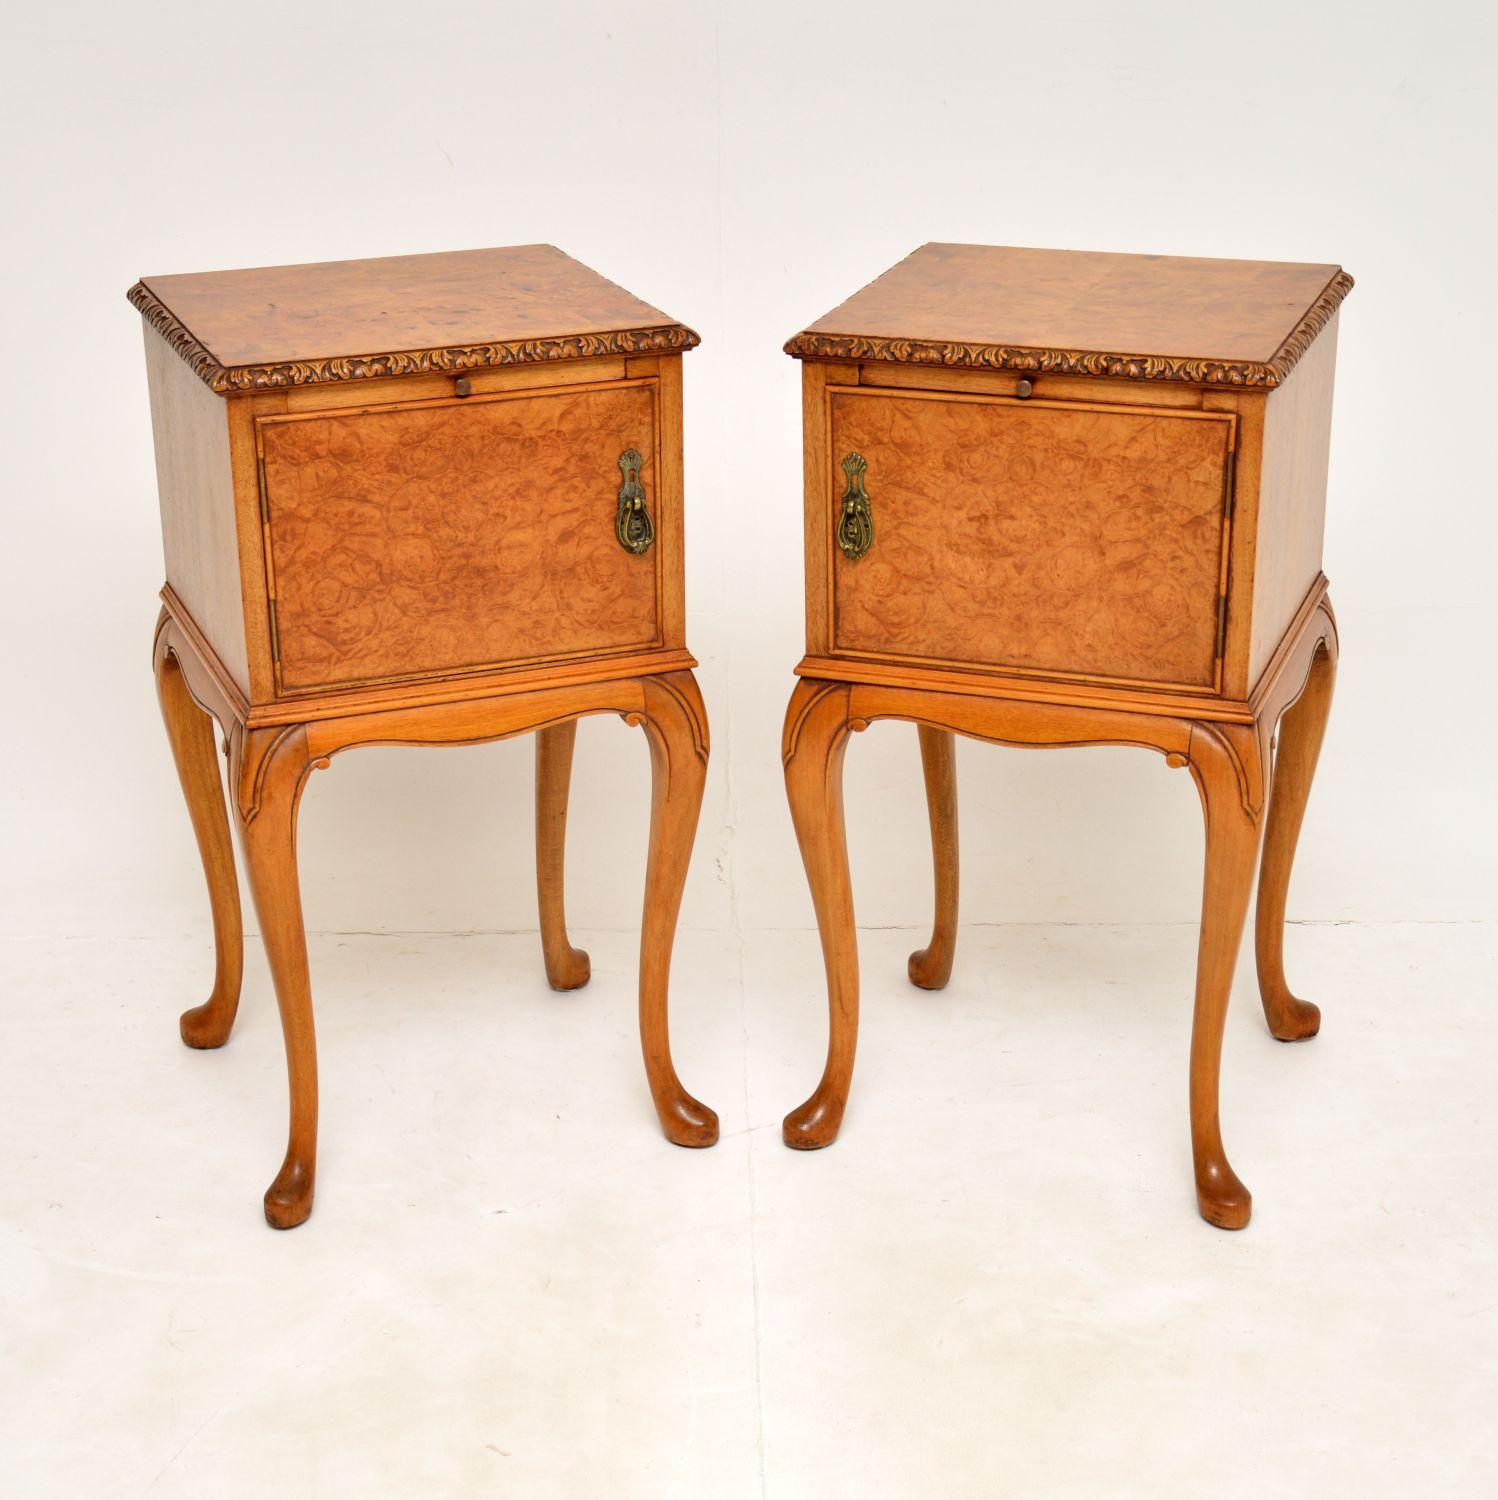 A beautiful pair of antique bedside cabinets in burr walnut. These were made in England, they date from around the 1920-1930’s.

They are of superb quality, are a very useful size and have a gorgeous colour. They sit on shapely cabriole legs, with